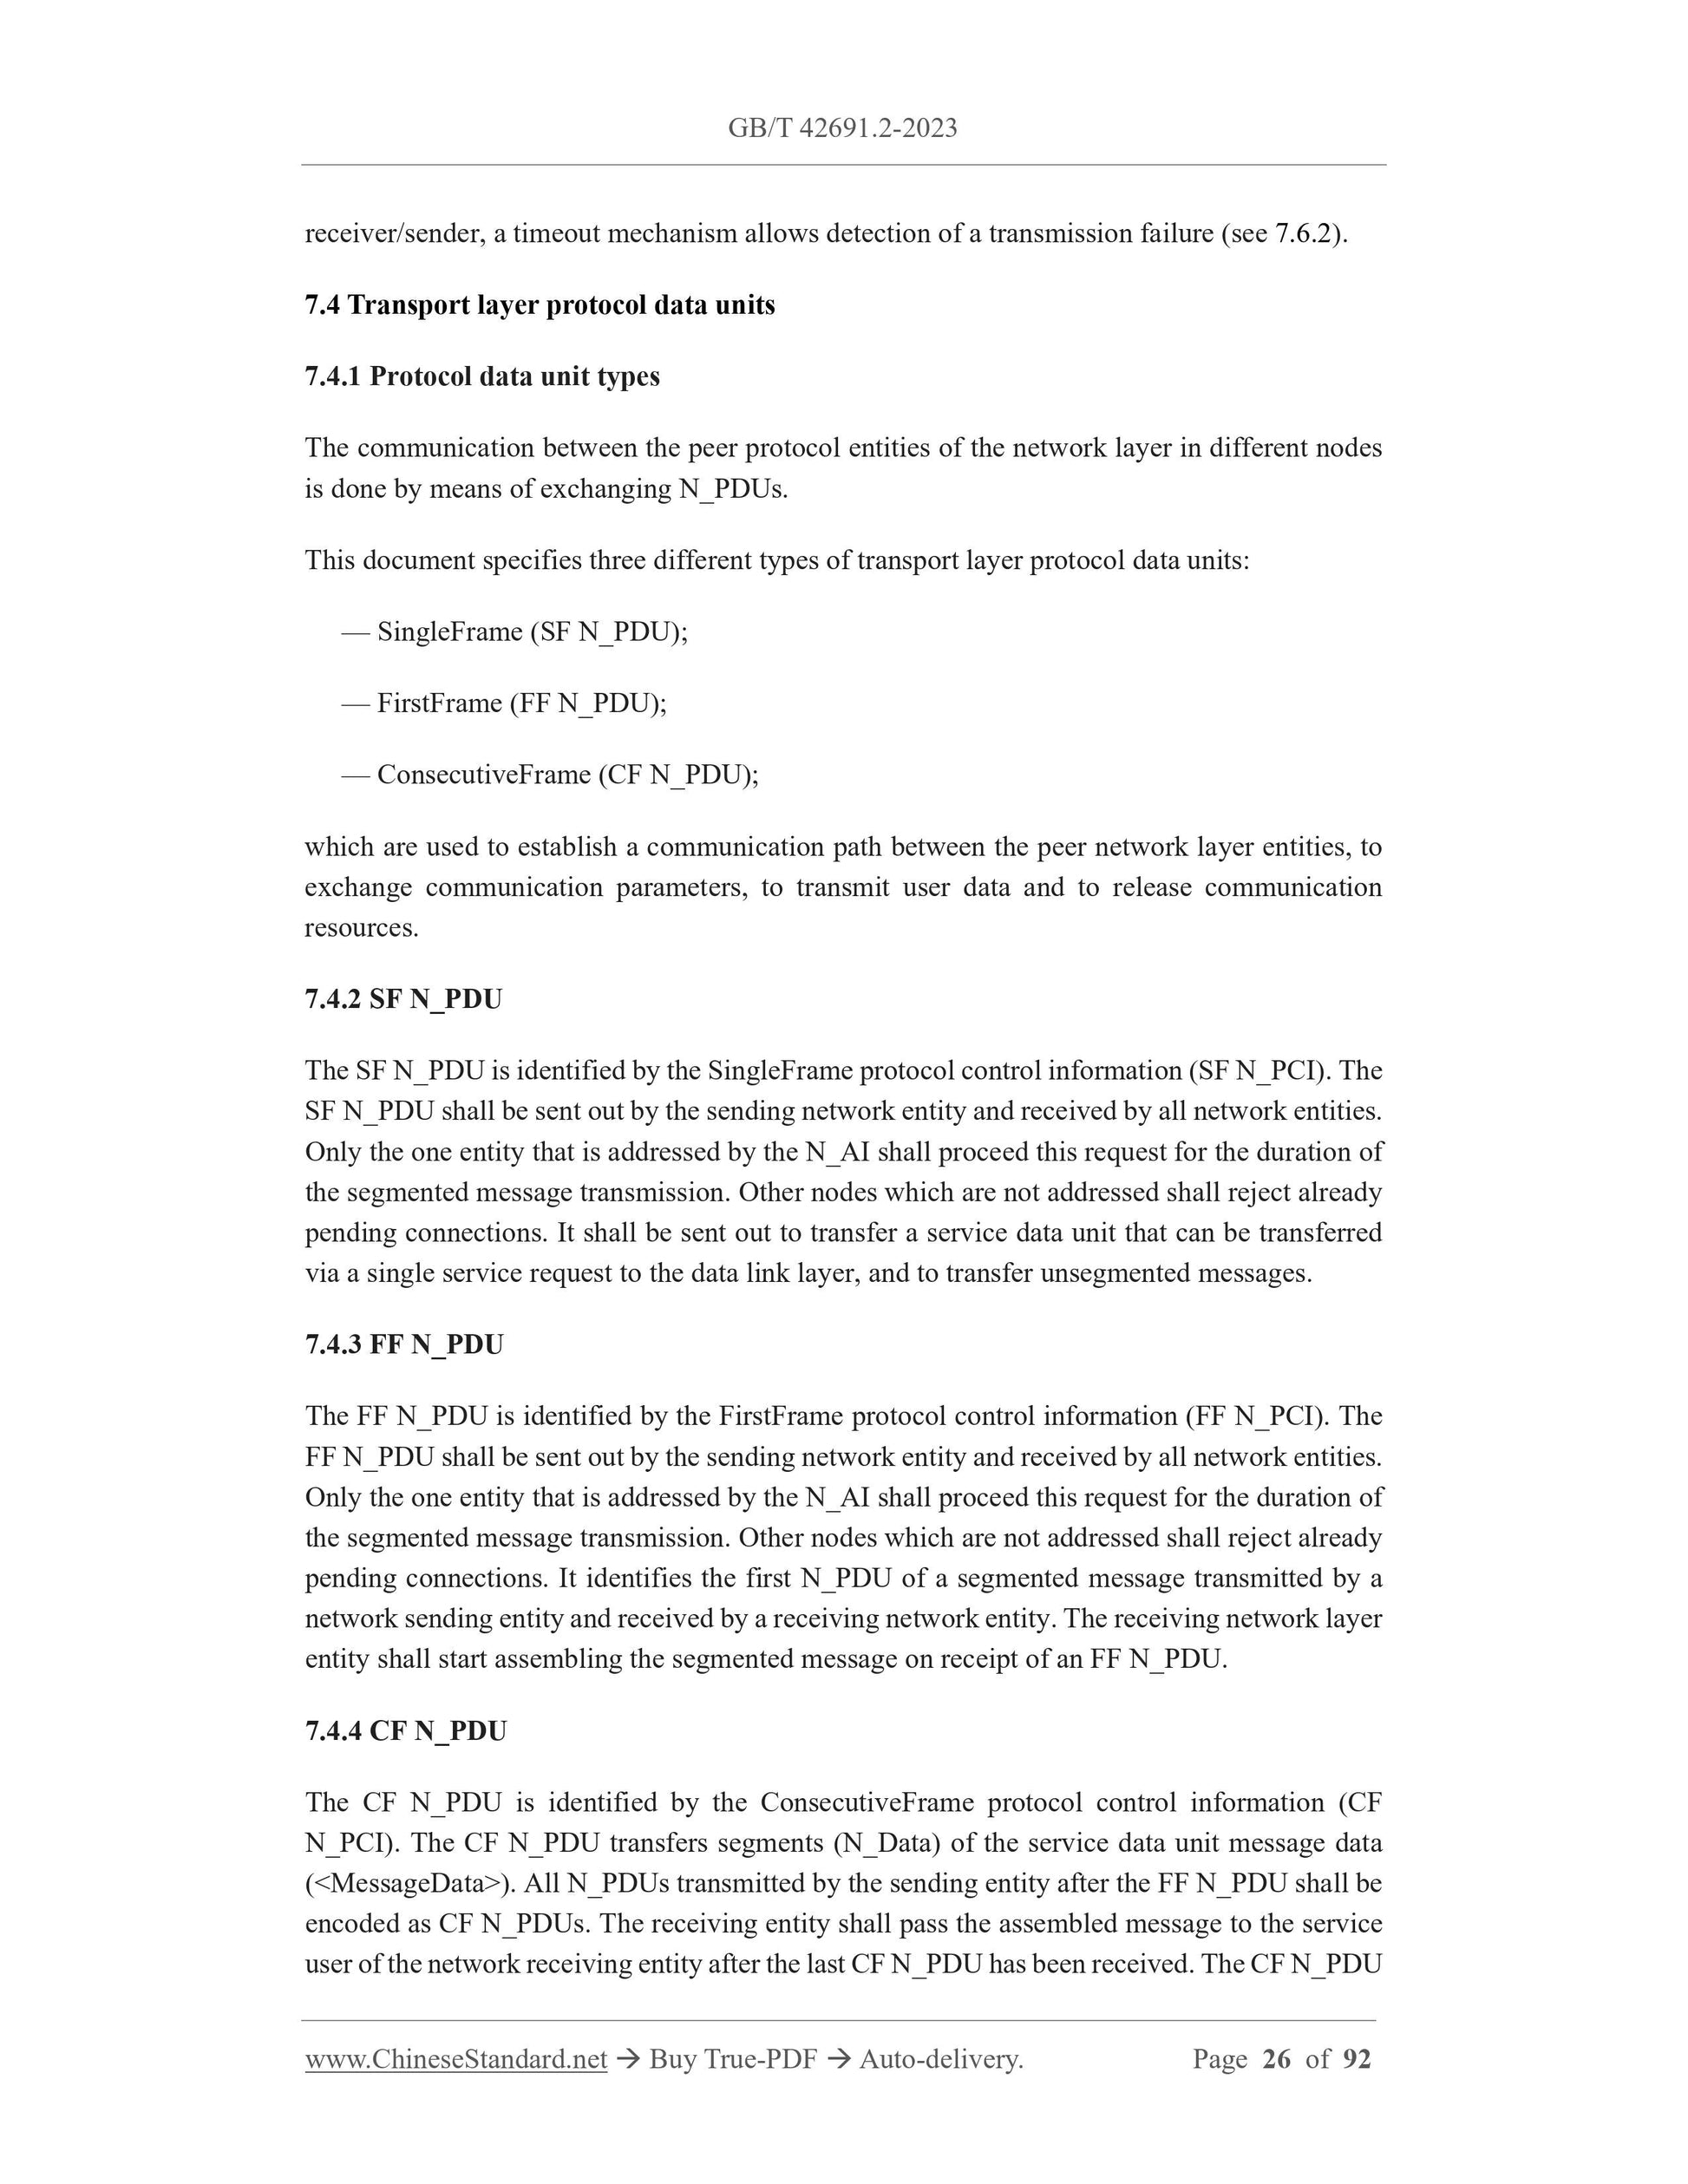 GB/T 42691.2-2023 Page 6